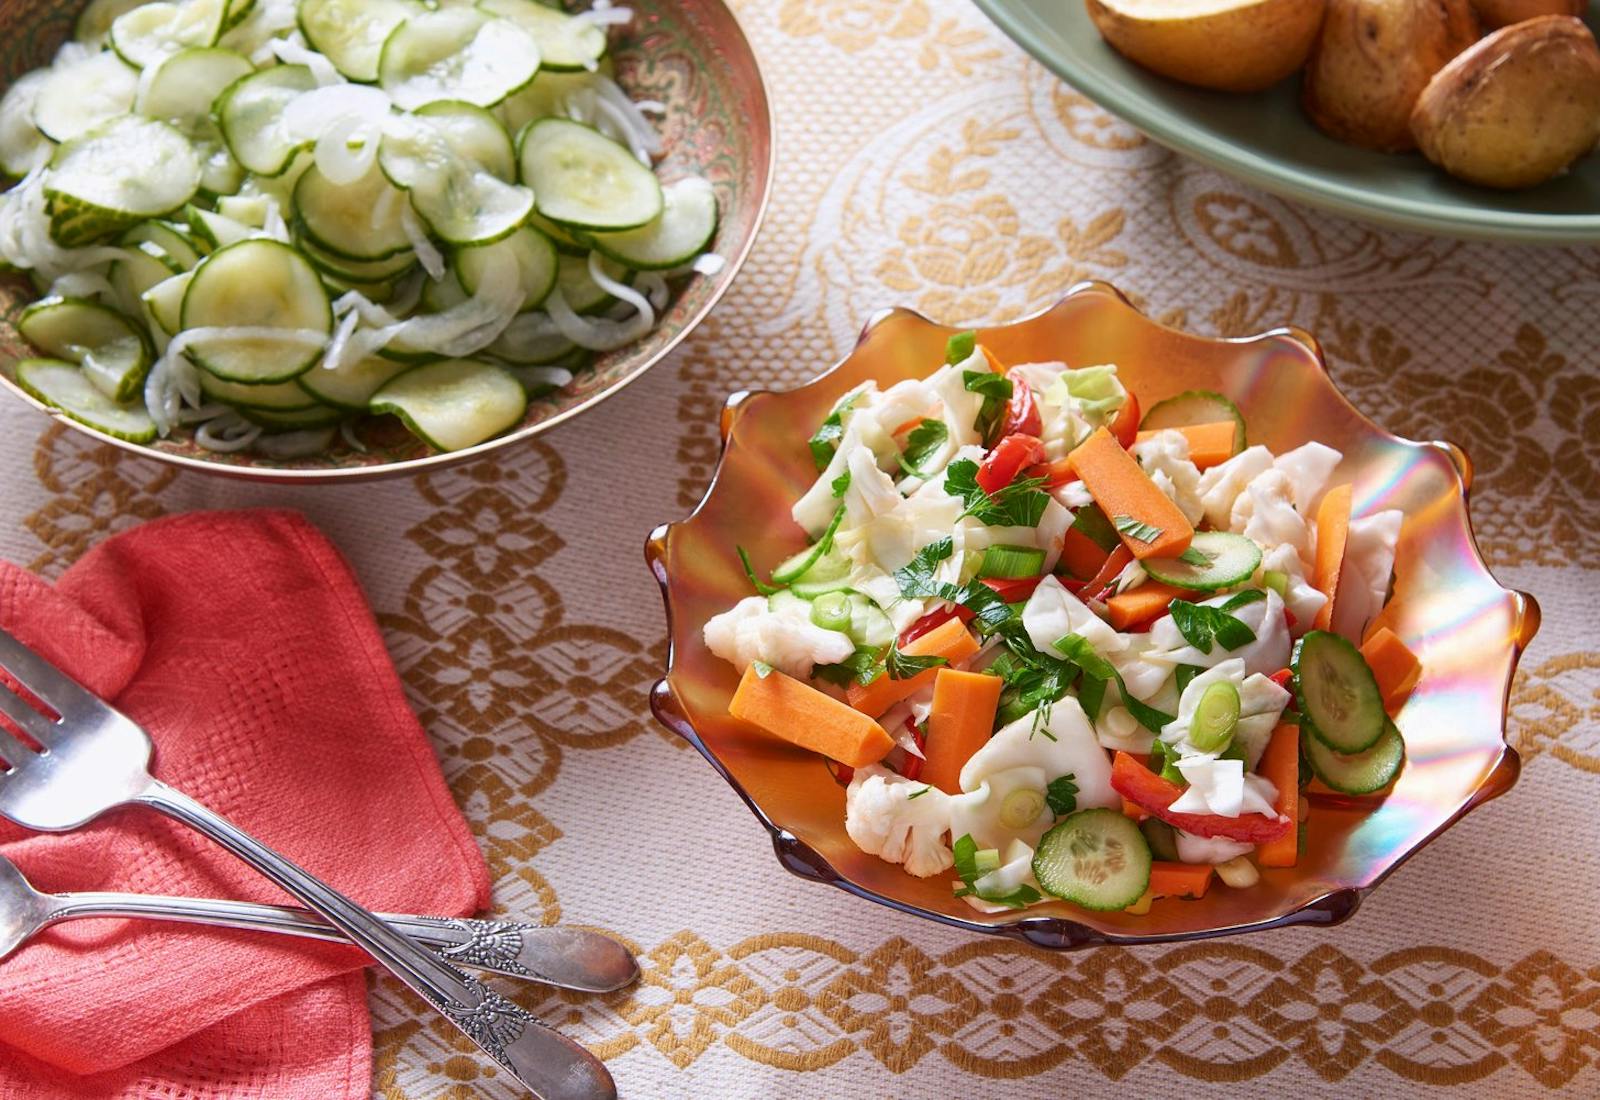 Fermented vegetable salad in orange scalloped dish alongside bowls of roasted potatoes and cucumber salad, atop orange patterned tablecloth.